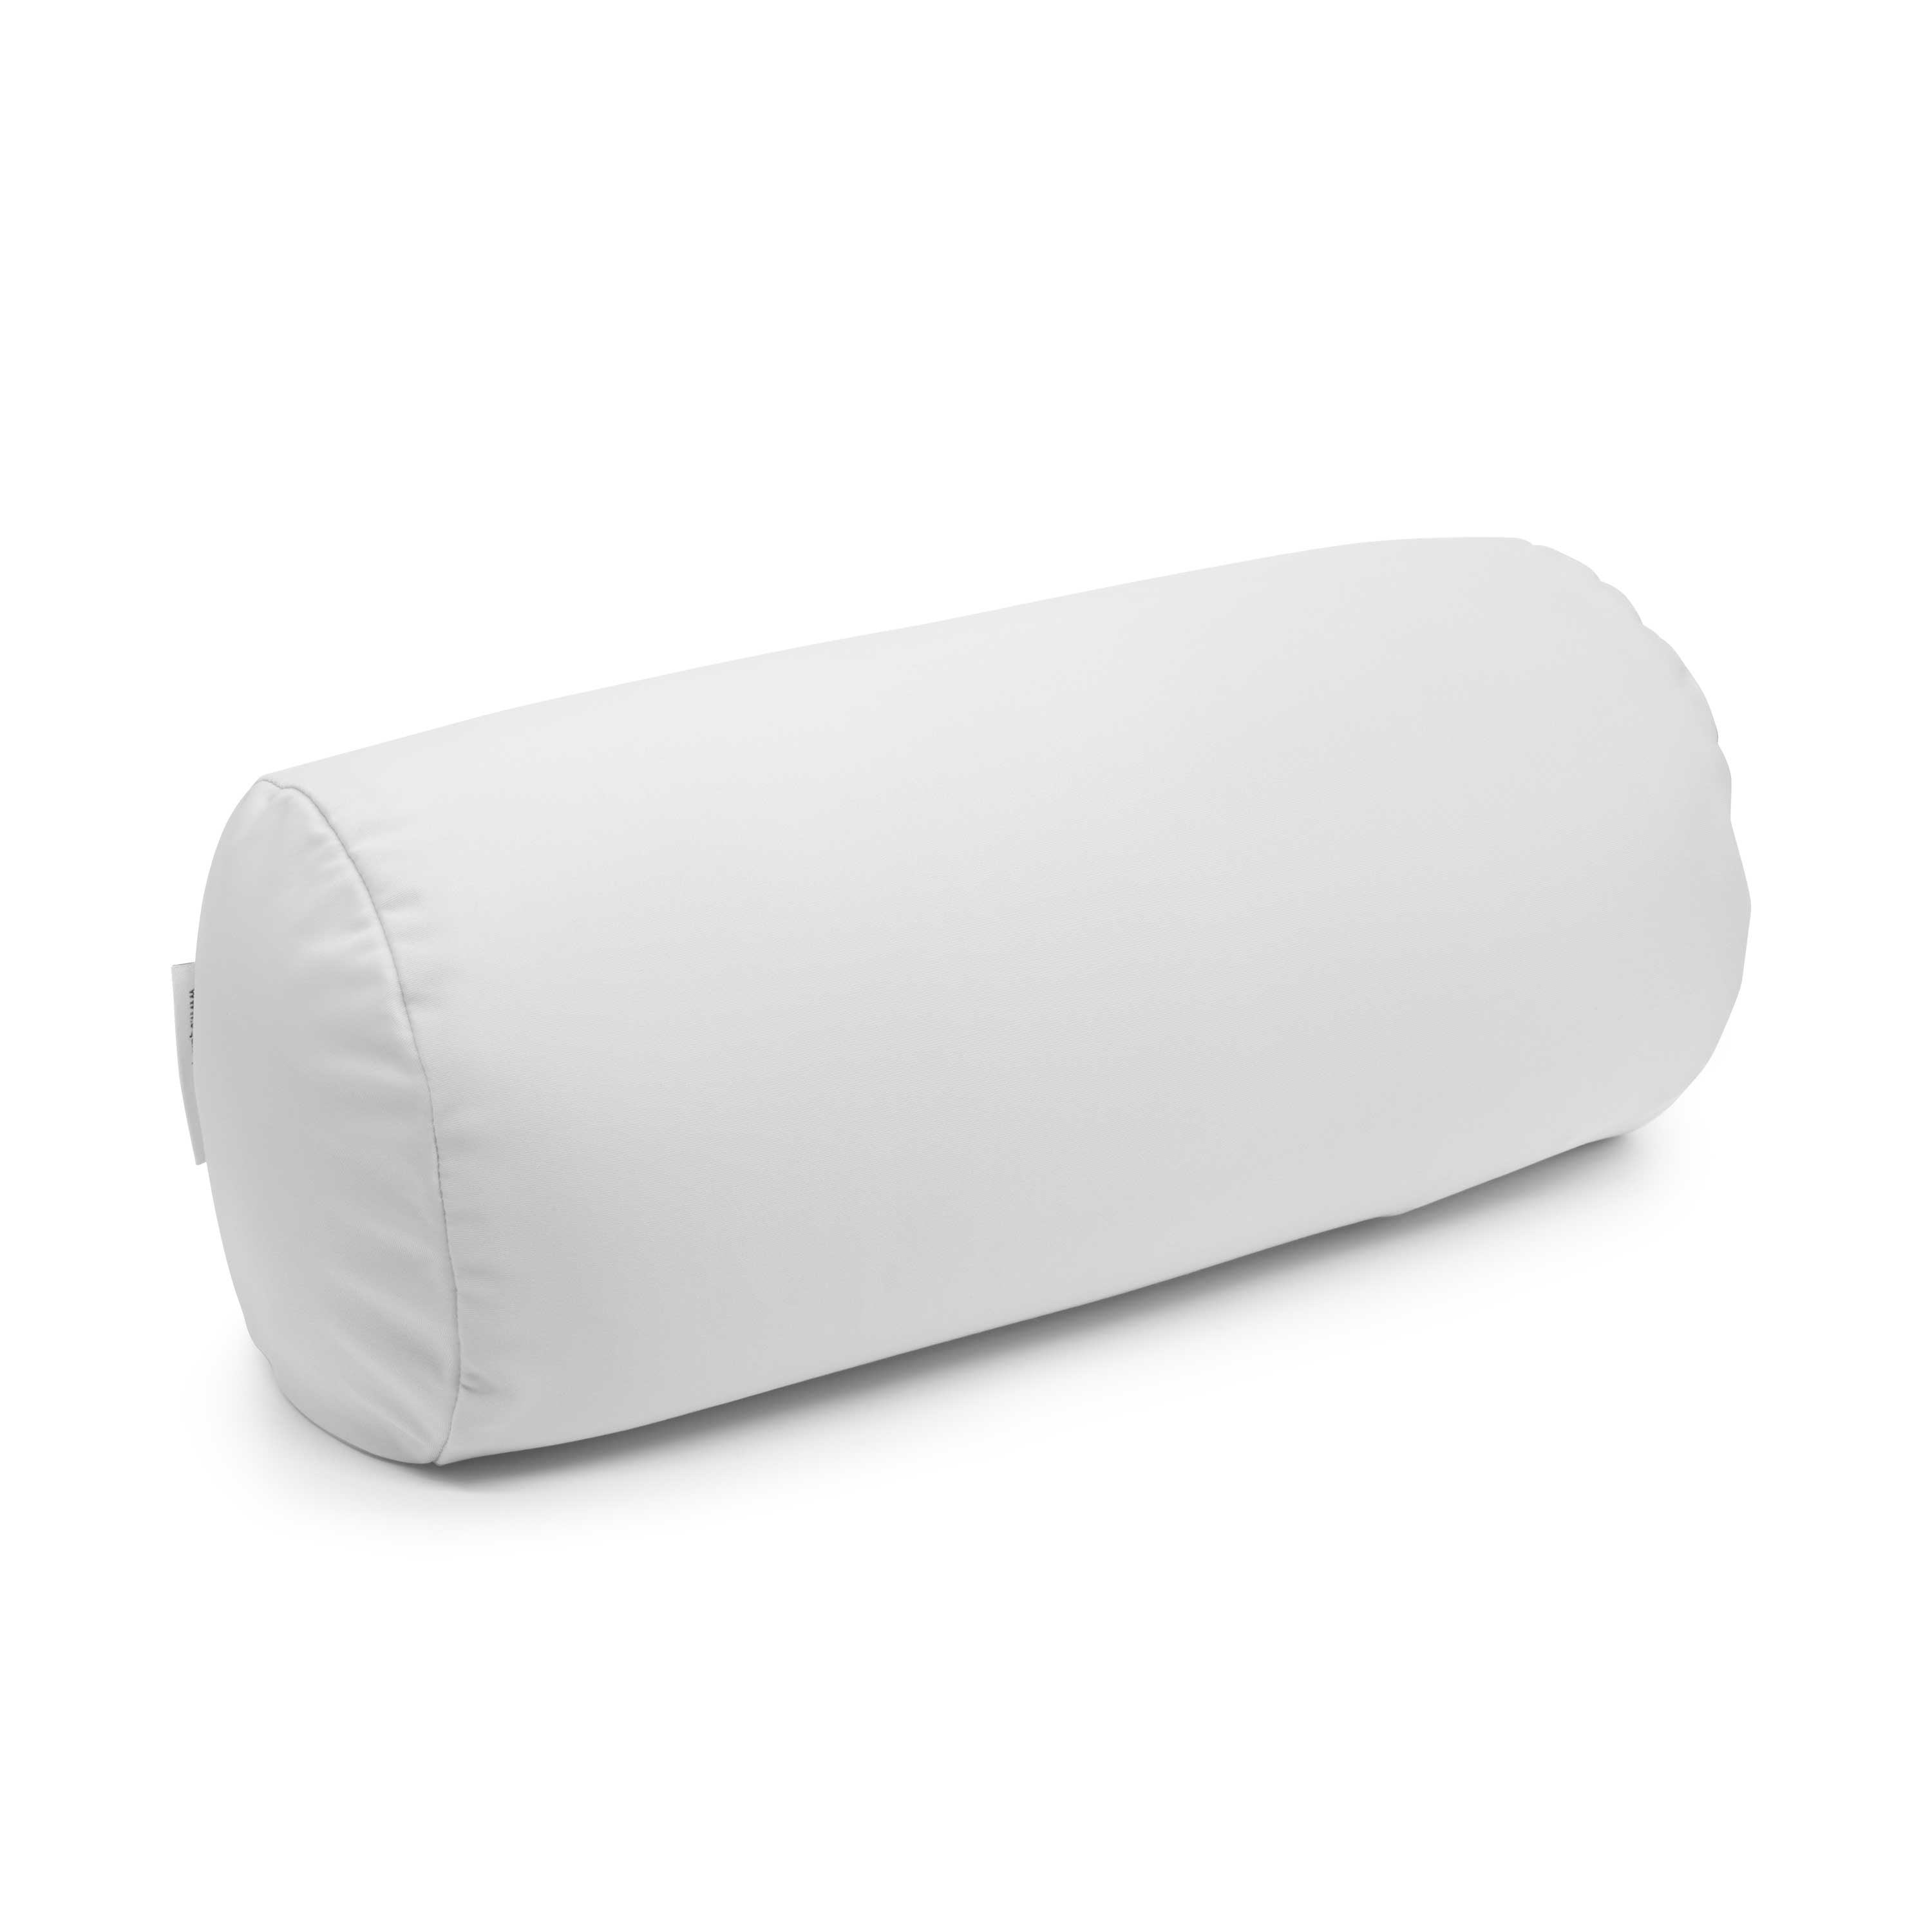 Squishy Deluxe Microbead Bolster Pillow with Removable Cover - White